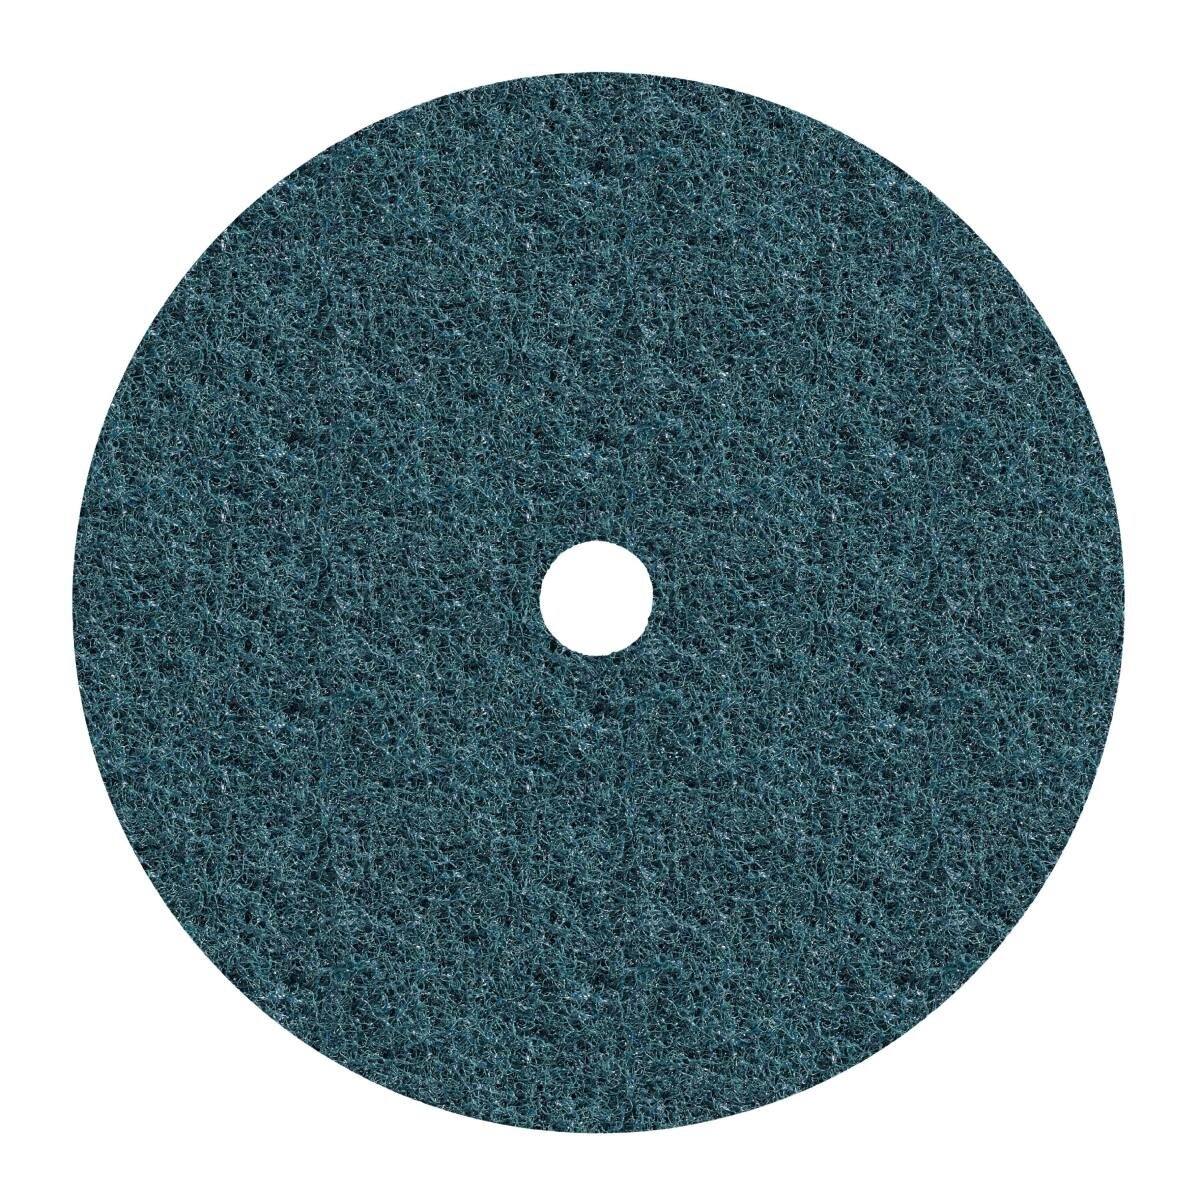 3M Scotch-Brite non-woven disc SC-DH with centering, blue, 115 mm, 22 mm, A, very fine 60983